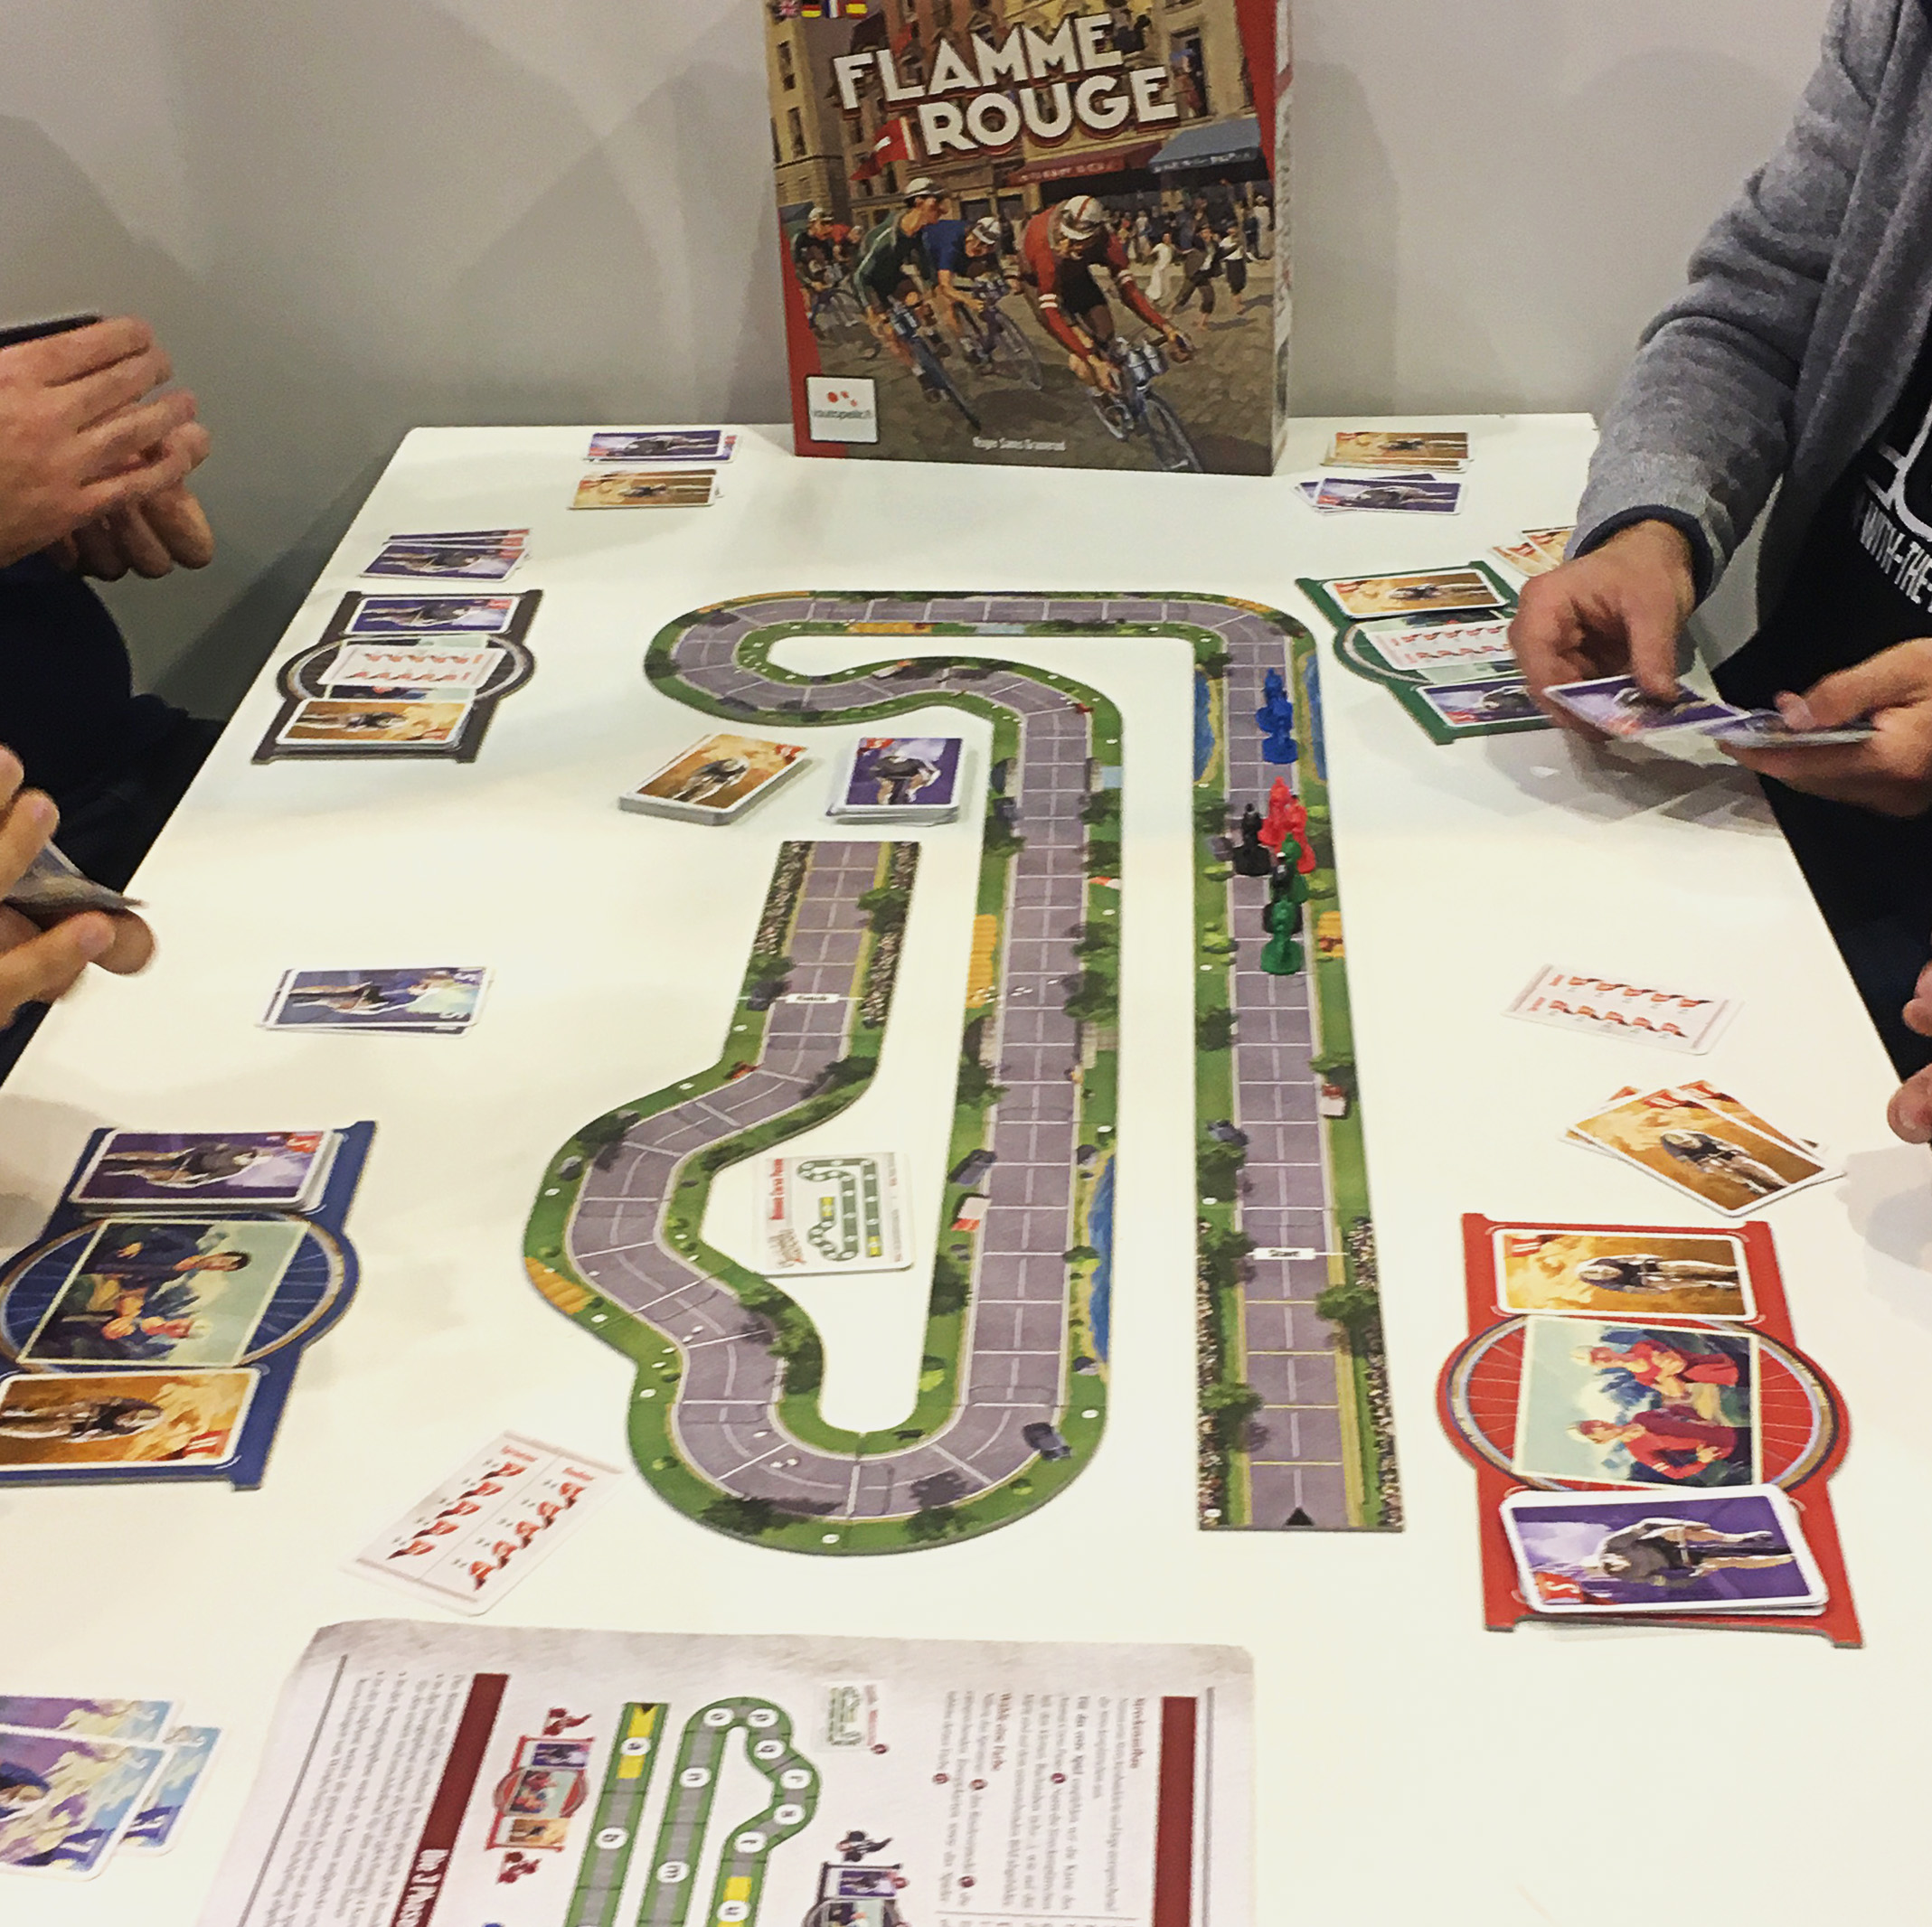 People playing La Flamme Rouge at Essen.